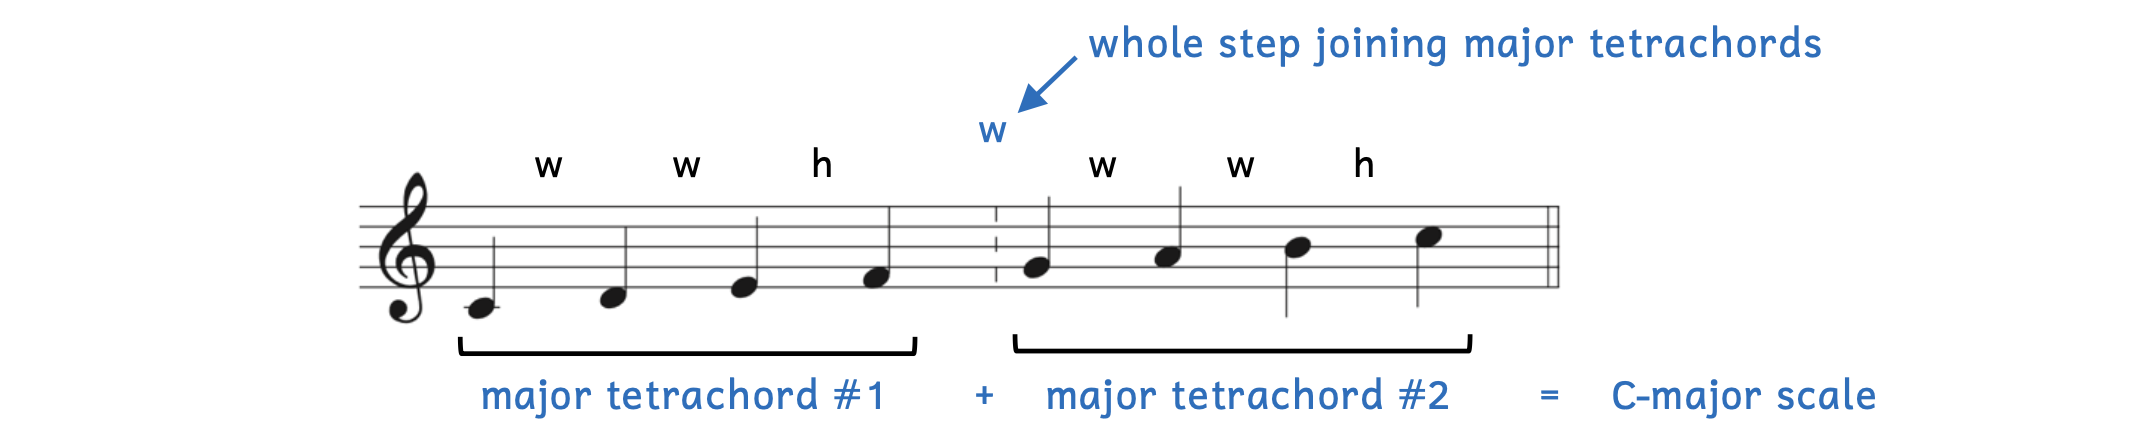 Major scale built by combining two major tetrachords. Major tetrachord number 1 consists of C, D, E, and F. A whole step above F is G. Major tetrachord number 2 consists of G, A, B, and C. Joining the two major tetrachord together with a whole step in between creates a C major scale.